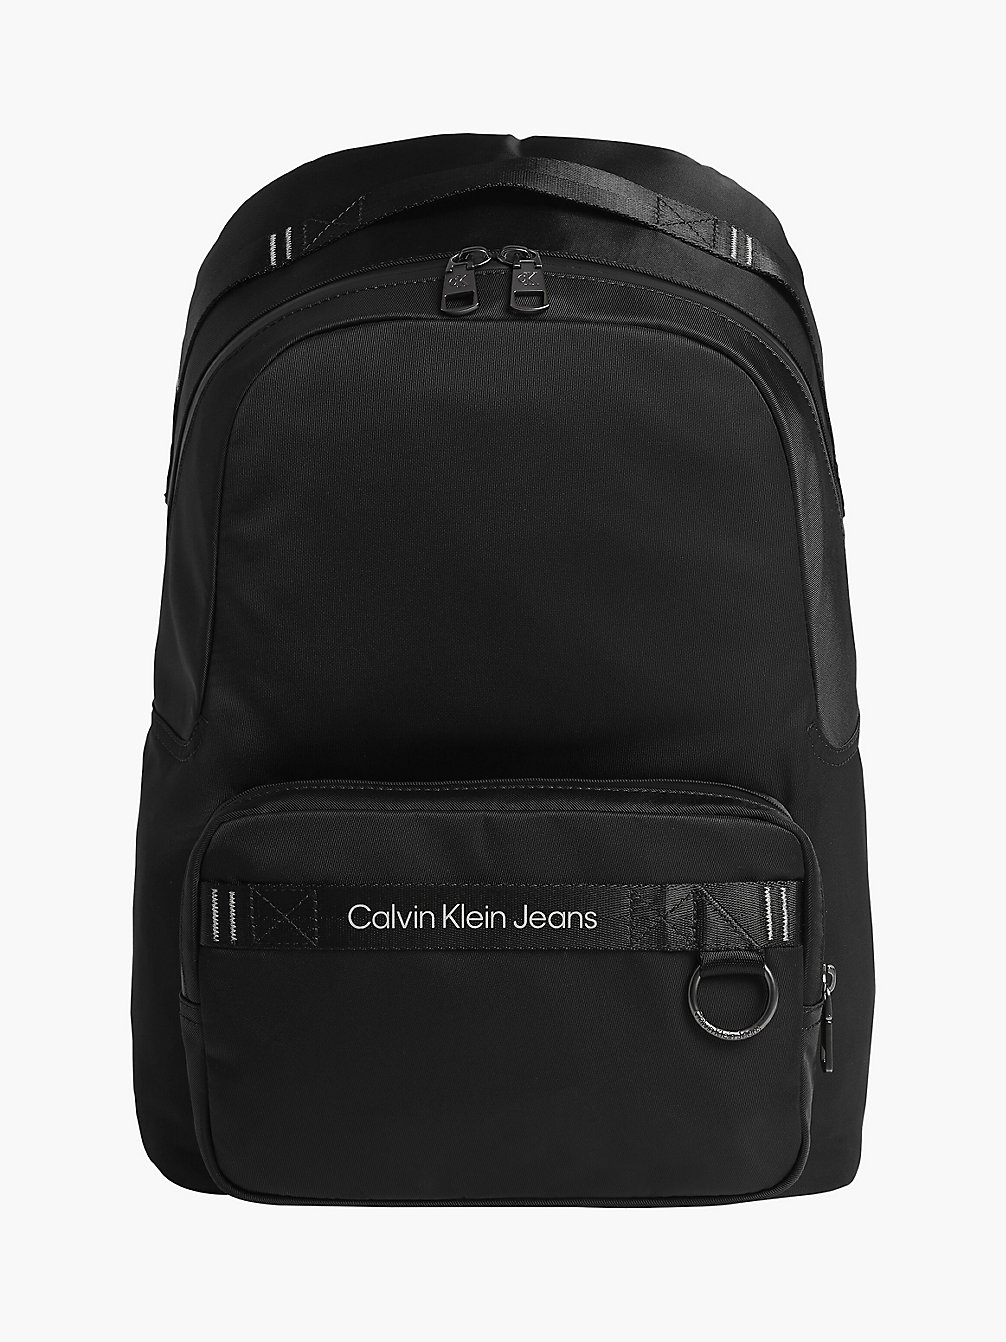 BLACK Recycled Nylon Round Backpack undefined men Calvin Klein